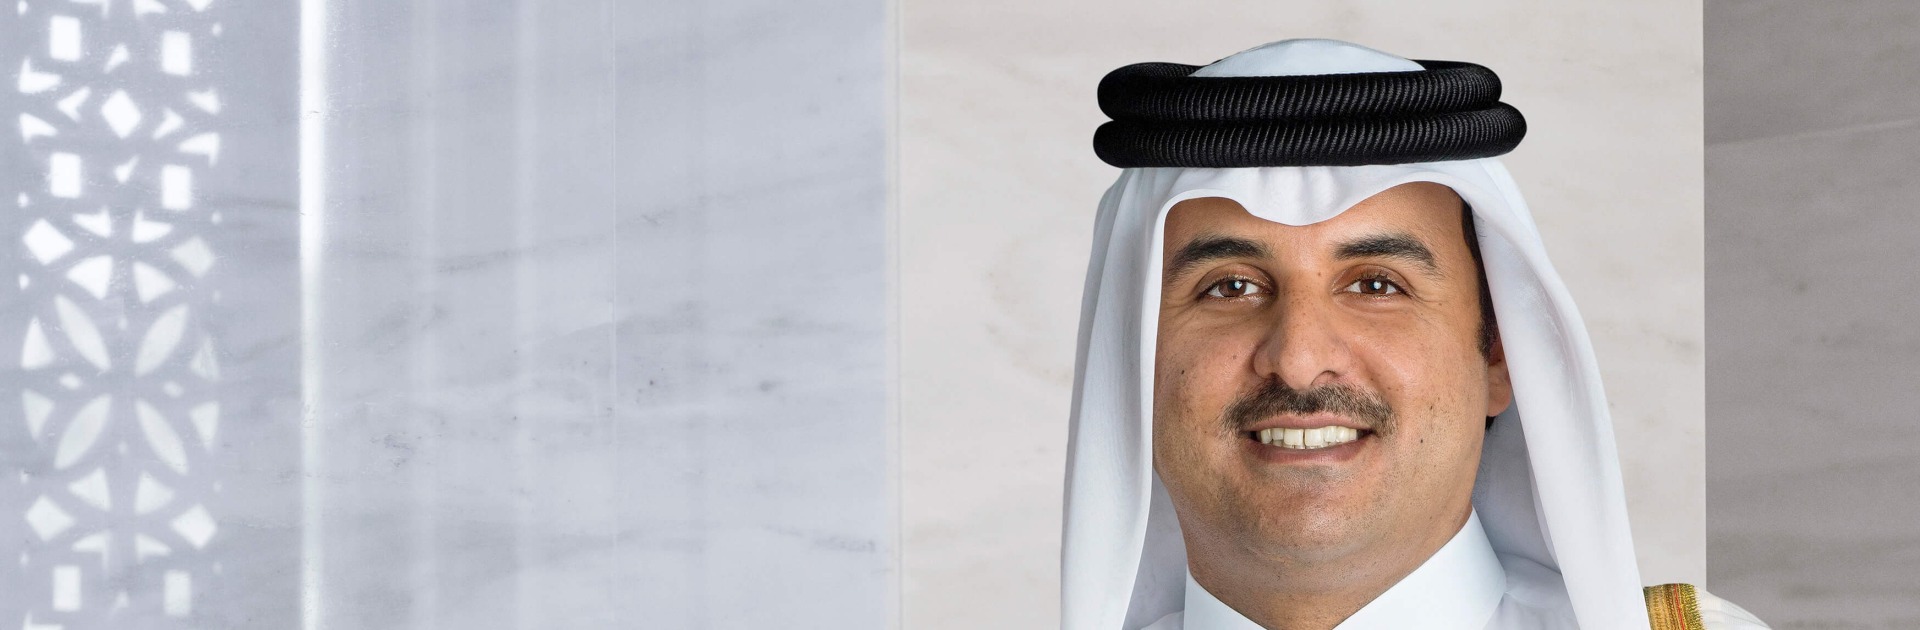 Qatar's Emir Completes Changing of the Guard with New Prime Minister and Interior Minister